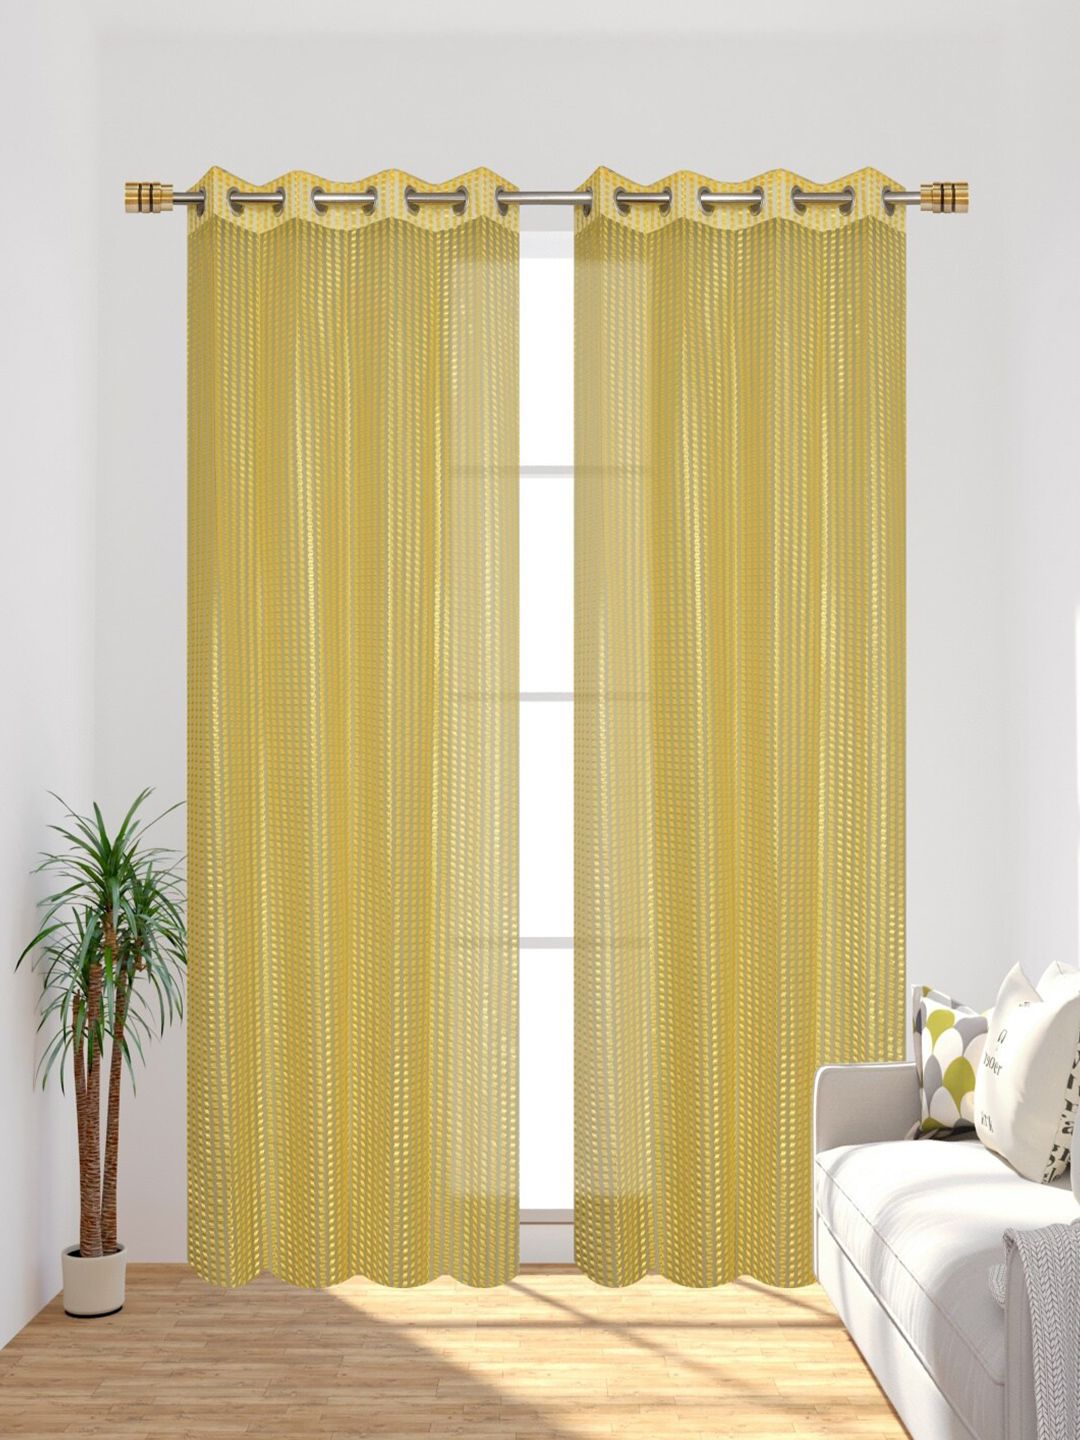 Homefab India Unisex Yellow Curtains and Sheers Price in India